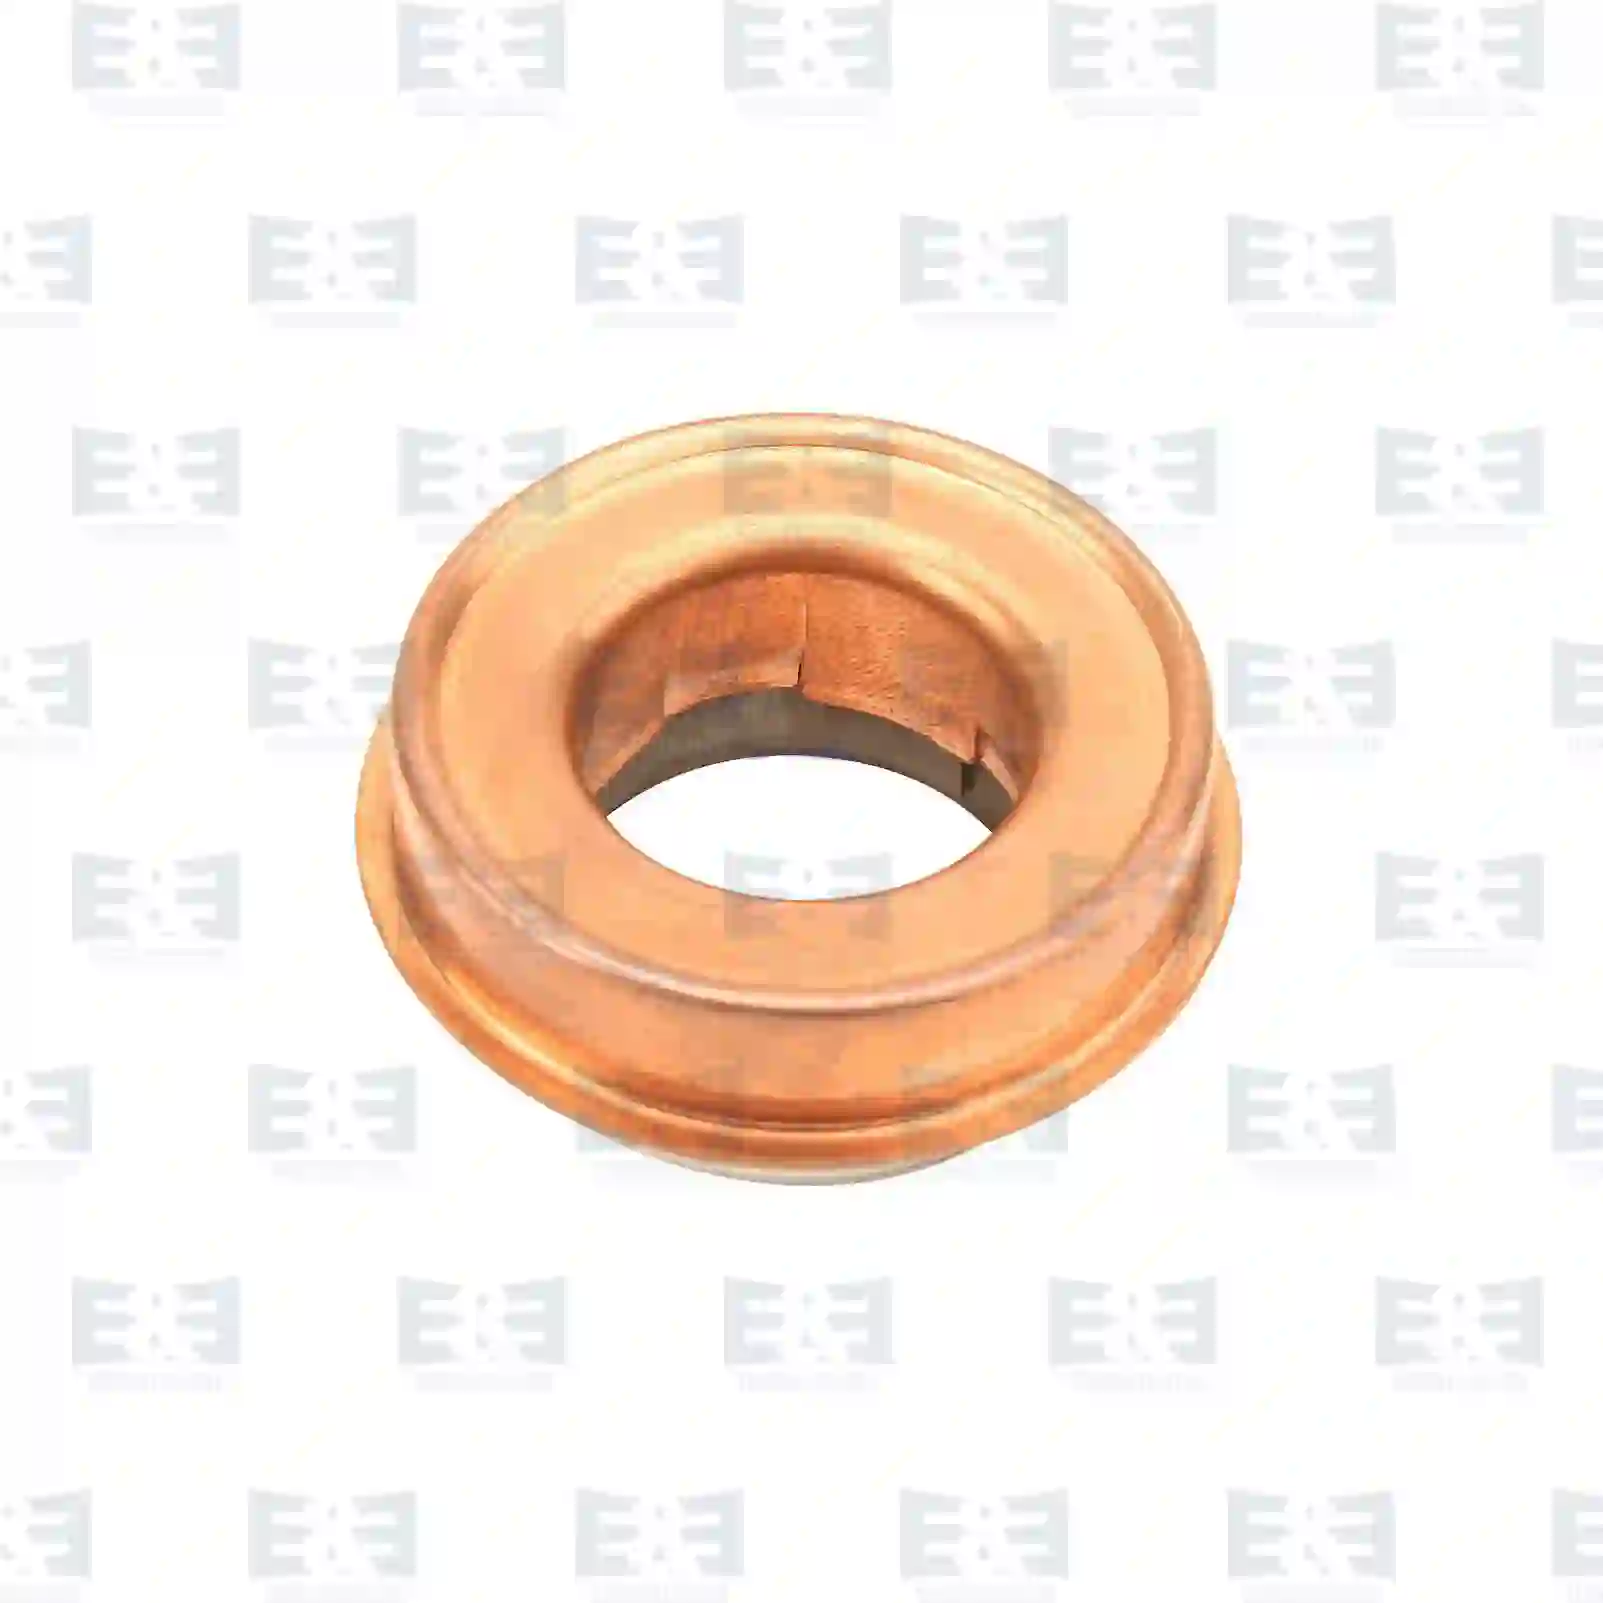  Slide ring seal || E&E Truck Spare Parts | Truck Spare Parts, Auotomotive Spare Parts